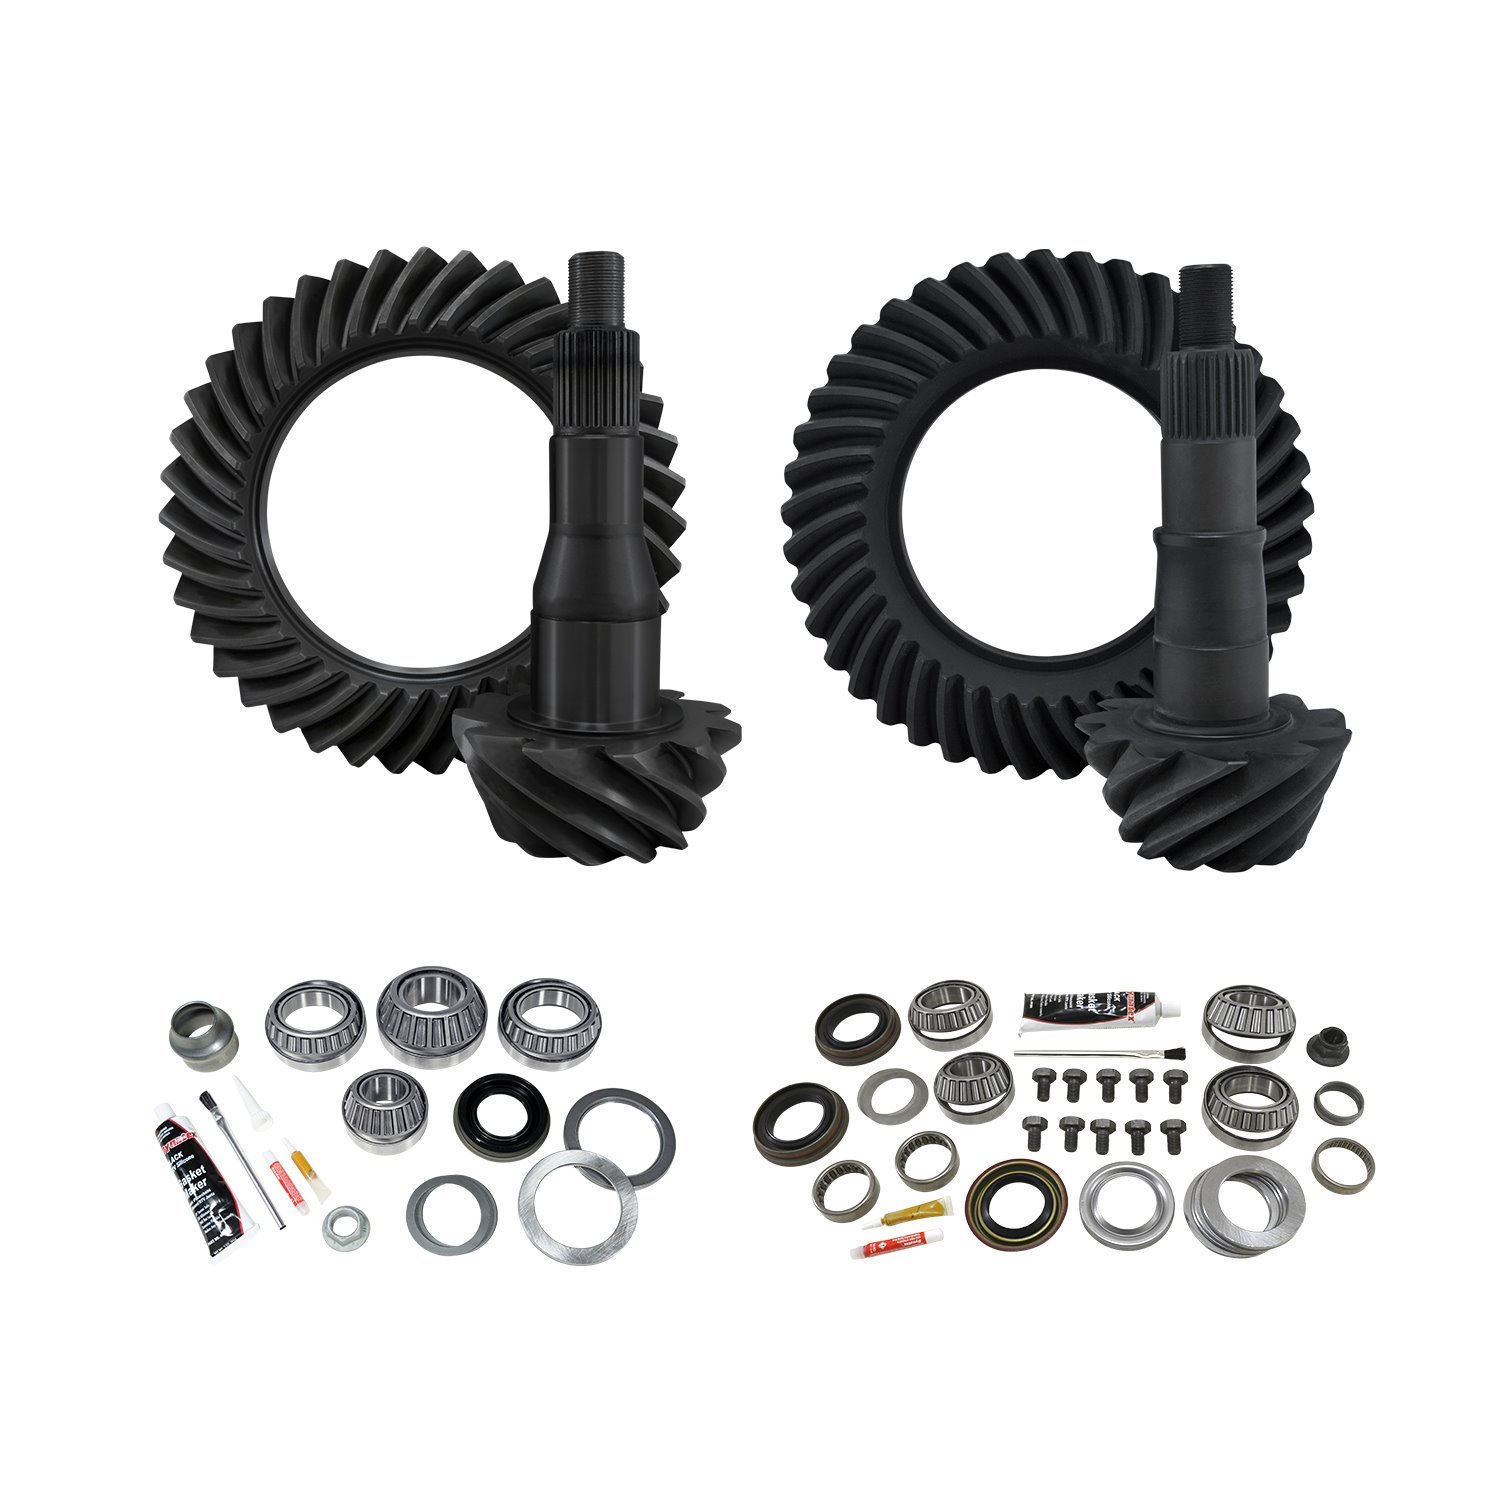 Re-Gear & Installation Kit, Ford 9.75 in., Various F150, 4.56 Ratio, Fr&Rr